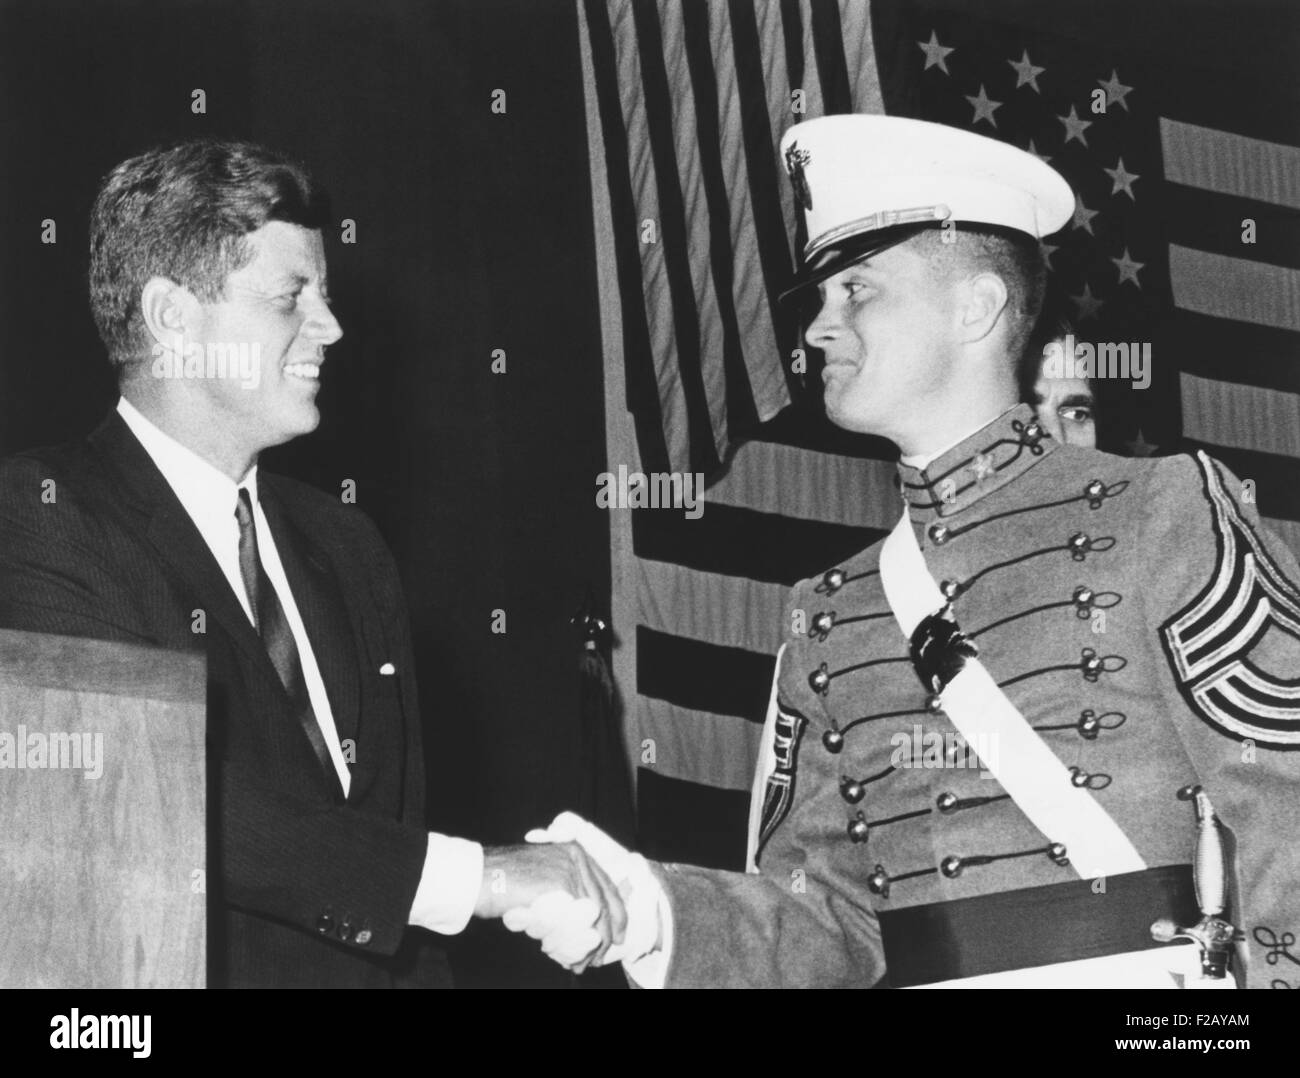 President Kennedy shakes hands with Cadet John H. Fagan Jr. at West Point. Fagan was named the No.1 man in General Order of Merit in the Military Academy's graduating class of 1962. (CSU 2015 9 810) Stock Photo